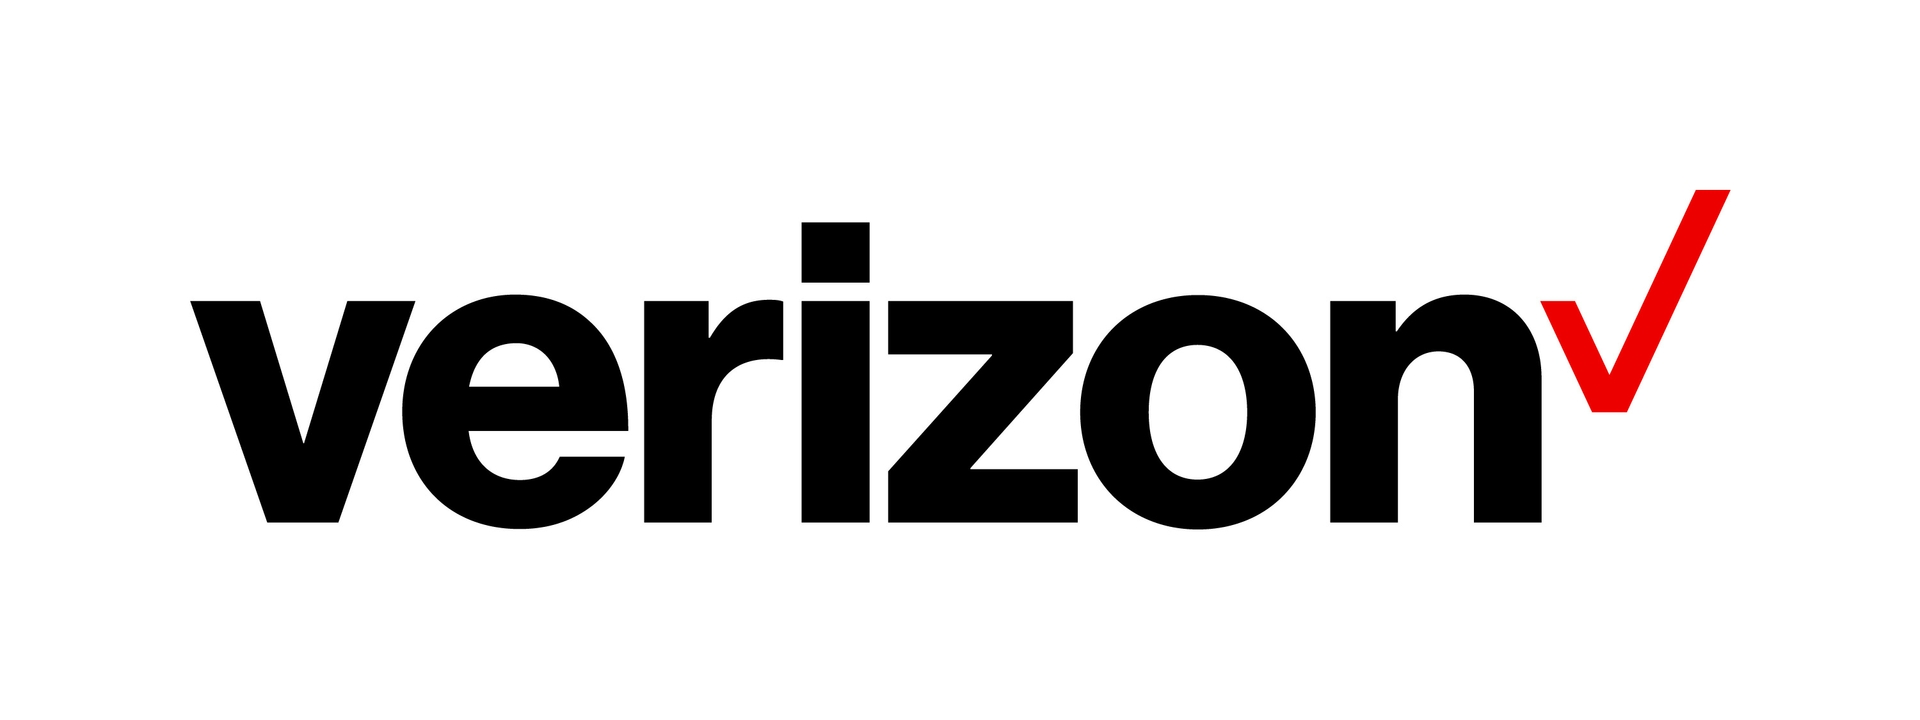 Verizon: Get NFL Sunday Ticket from YouTube On us.  Unlimited Plus with an eligible phone purchase, or with select Verizon Home Internet plans.